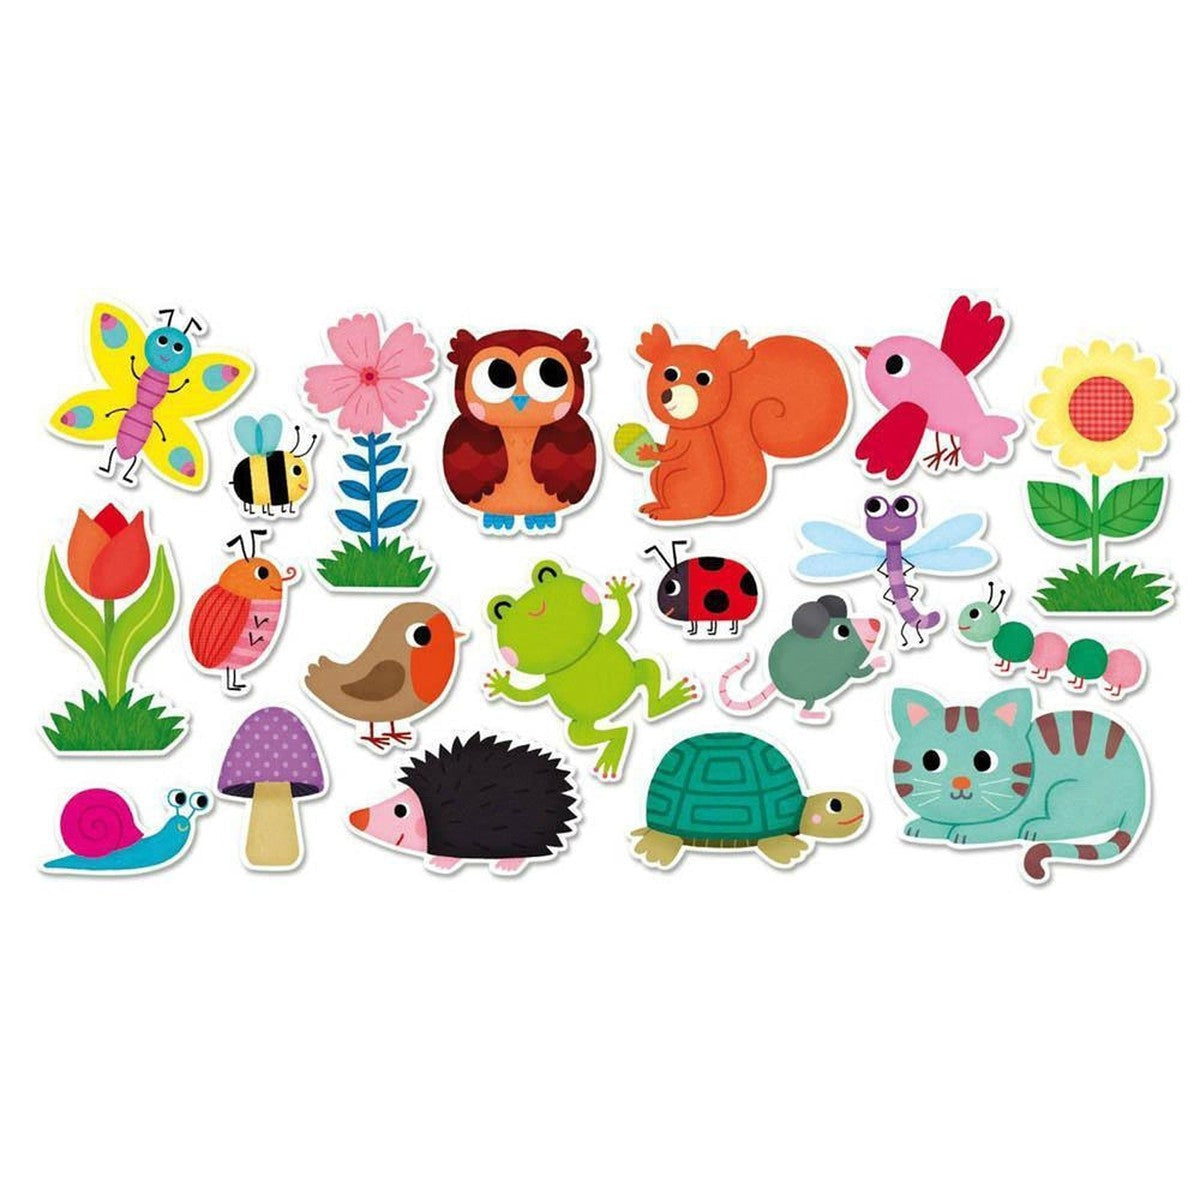 $40.89 - Cool Lovely Too 58pcs Magnetic Fishing Toys Fish Magnet Games With  Rod And Net Educational Toy For Childr…